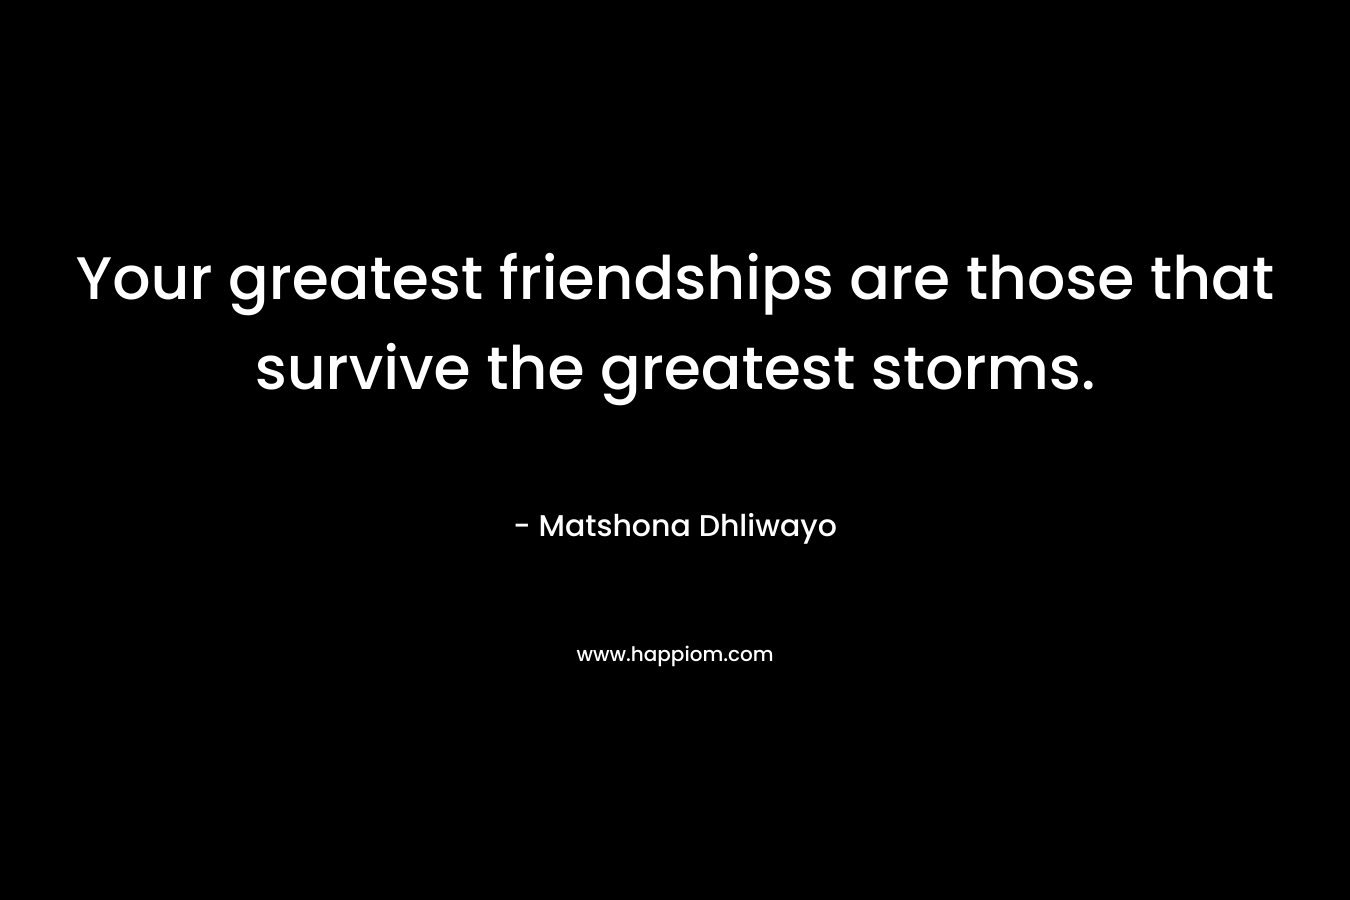 Your greatest friendships are those that survive the greatest storms.